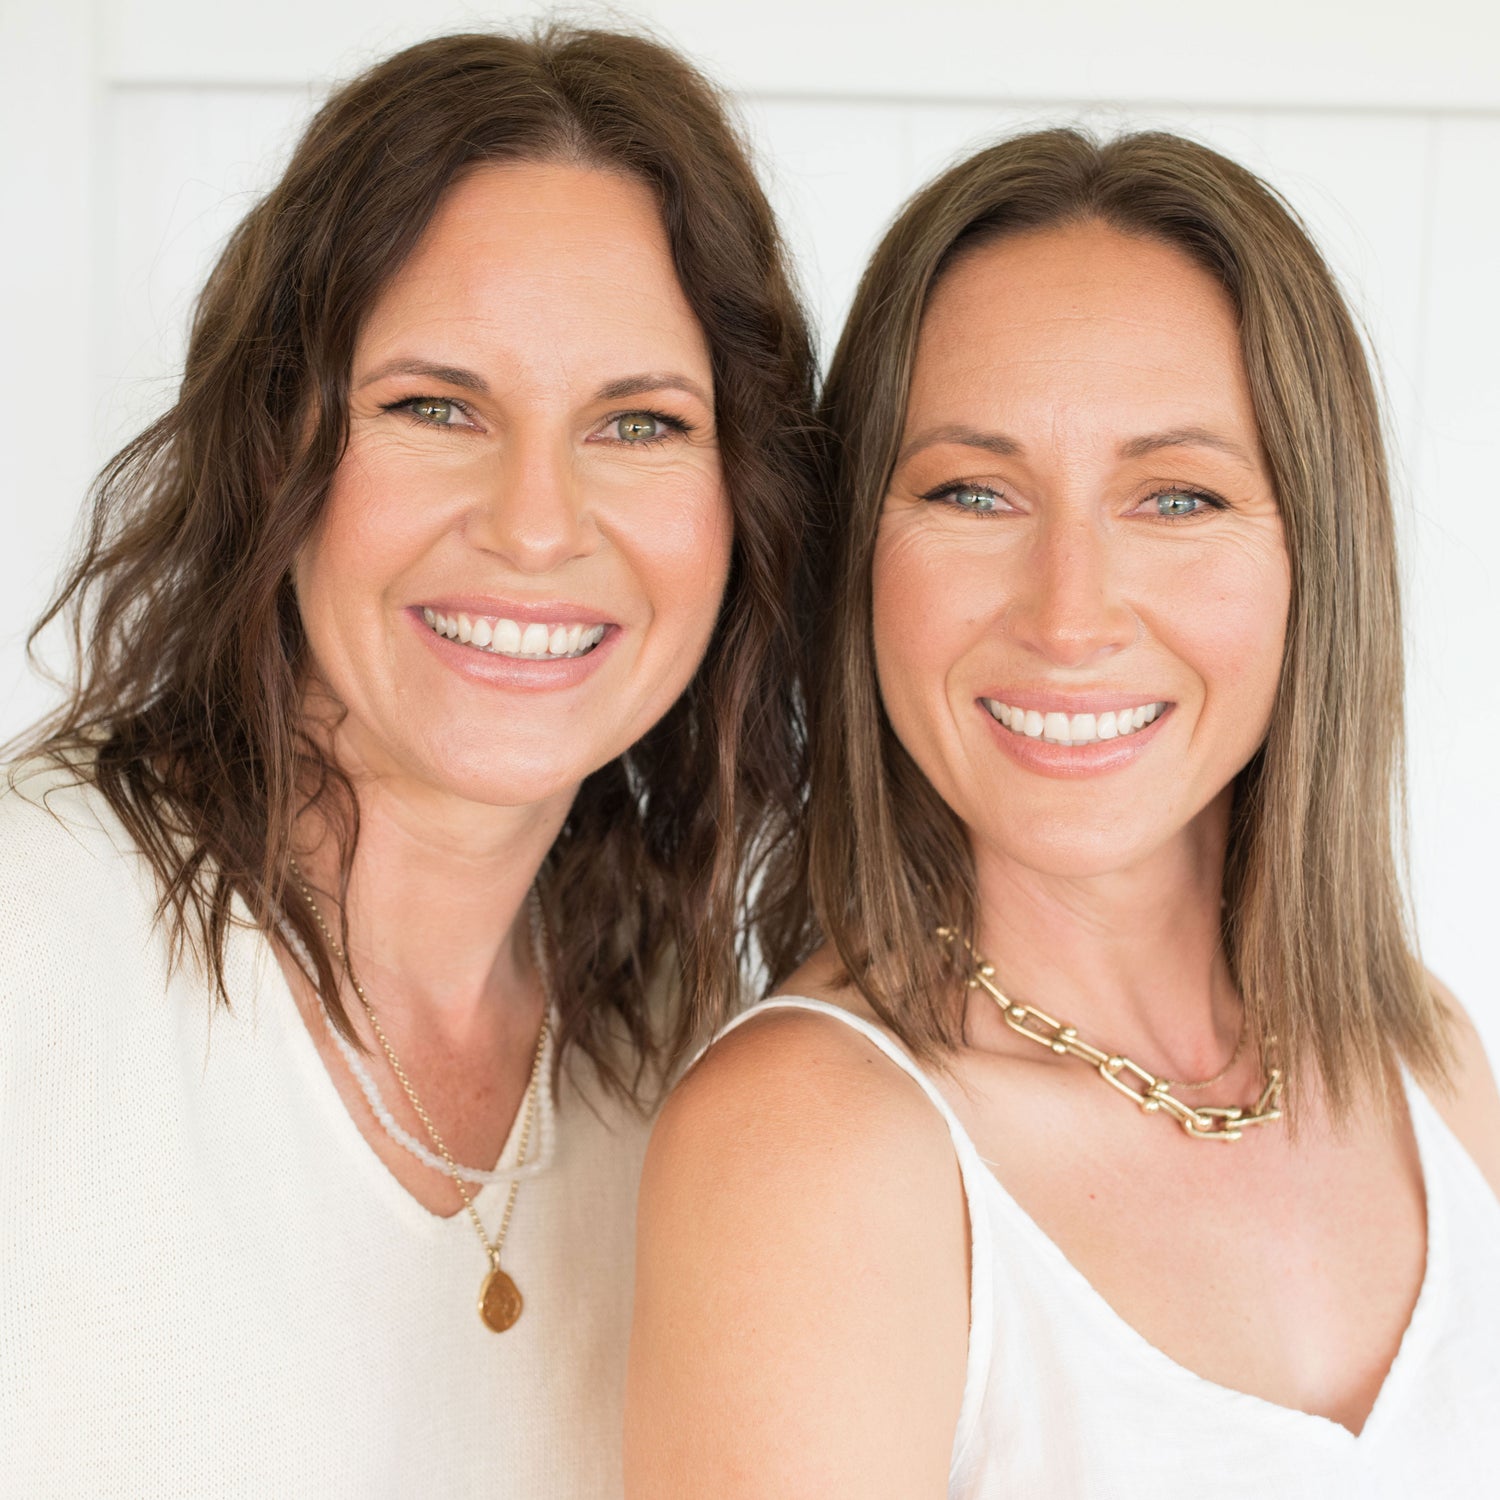 Sisters and co-founders of Bubbles Organic